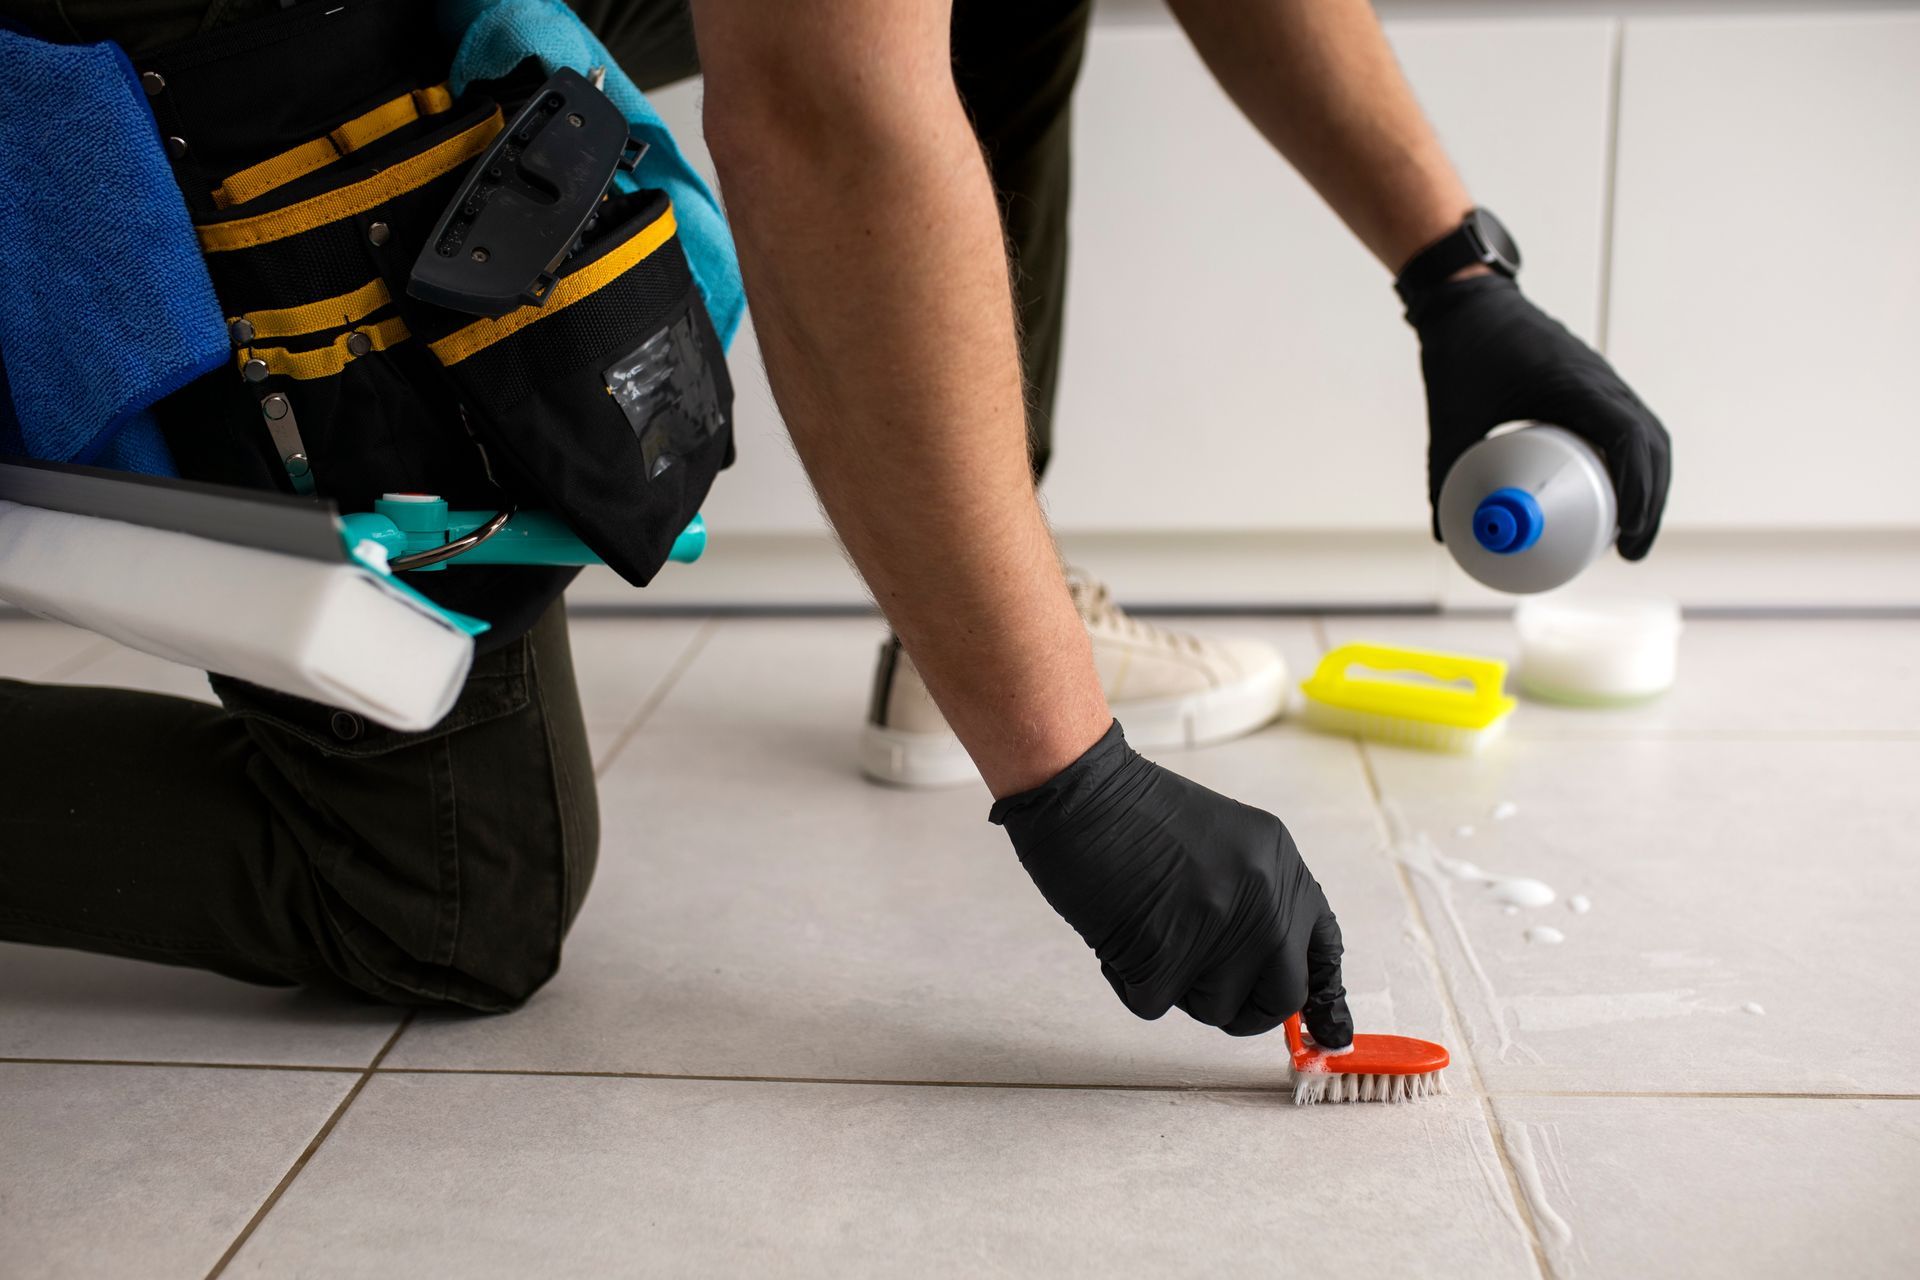 a person wearing black gloves is cleaning a tile floor